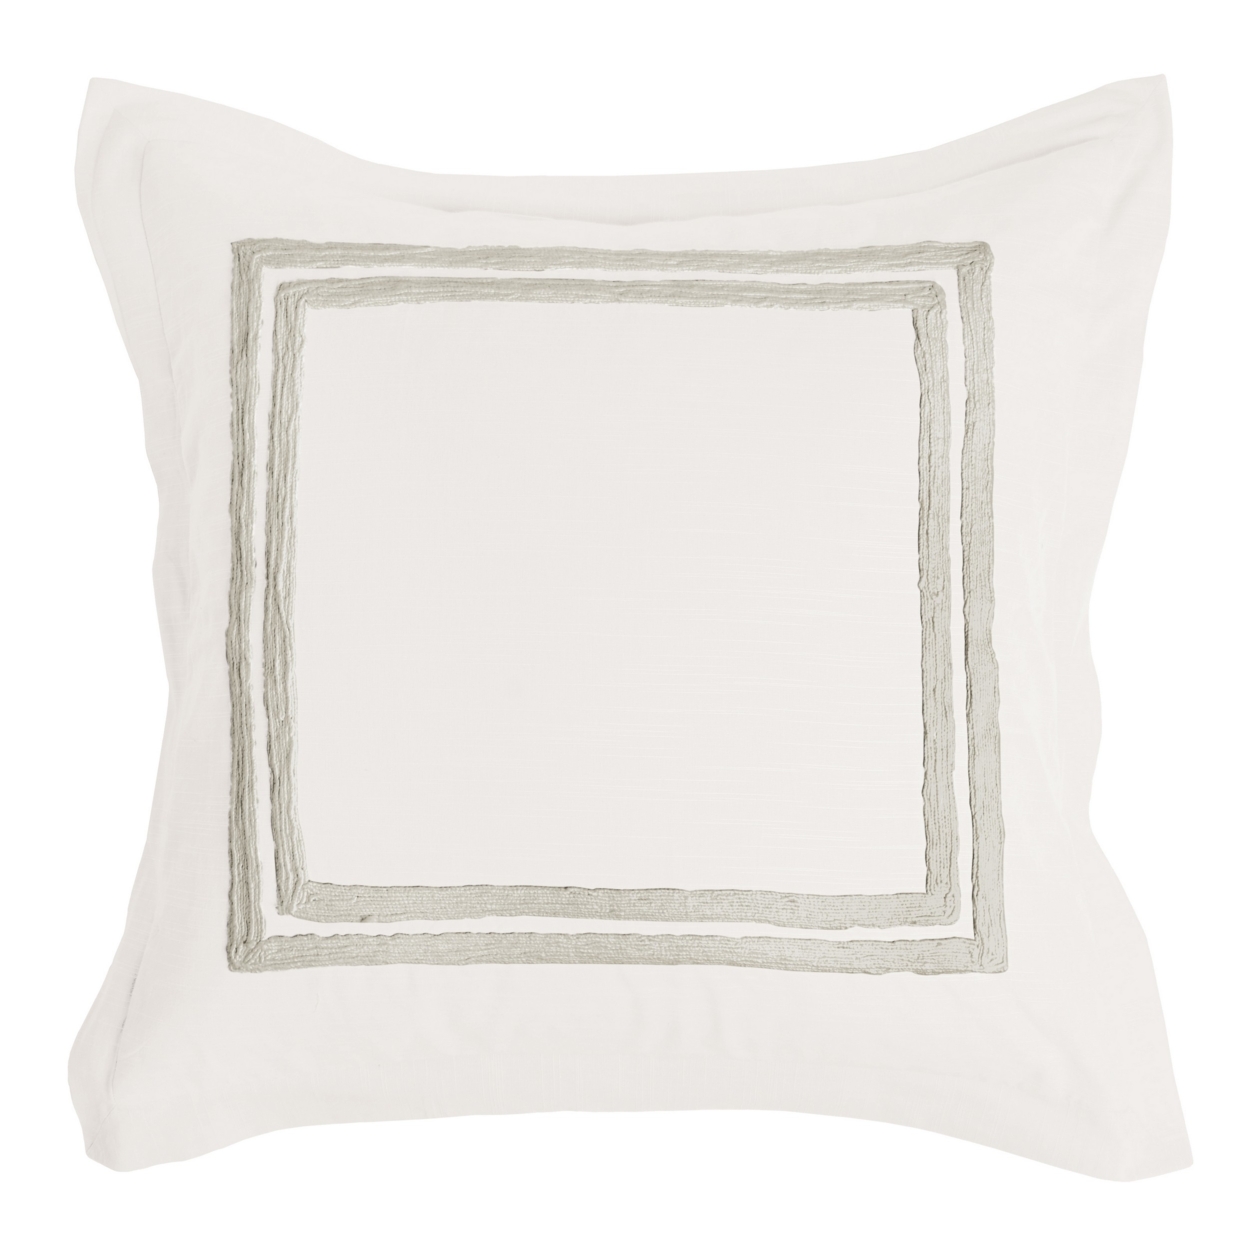 Lenz 26 Inch Cotton Euro Pillow Sham With Hand Stitched Embroidery, Ivory- Saltoro Sherpi